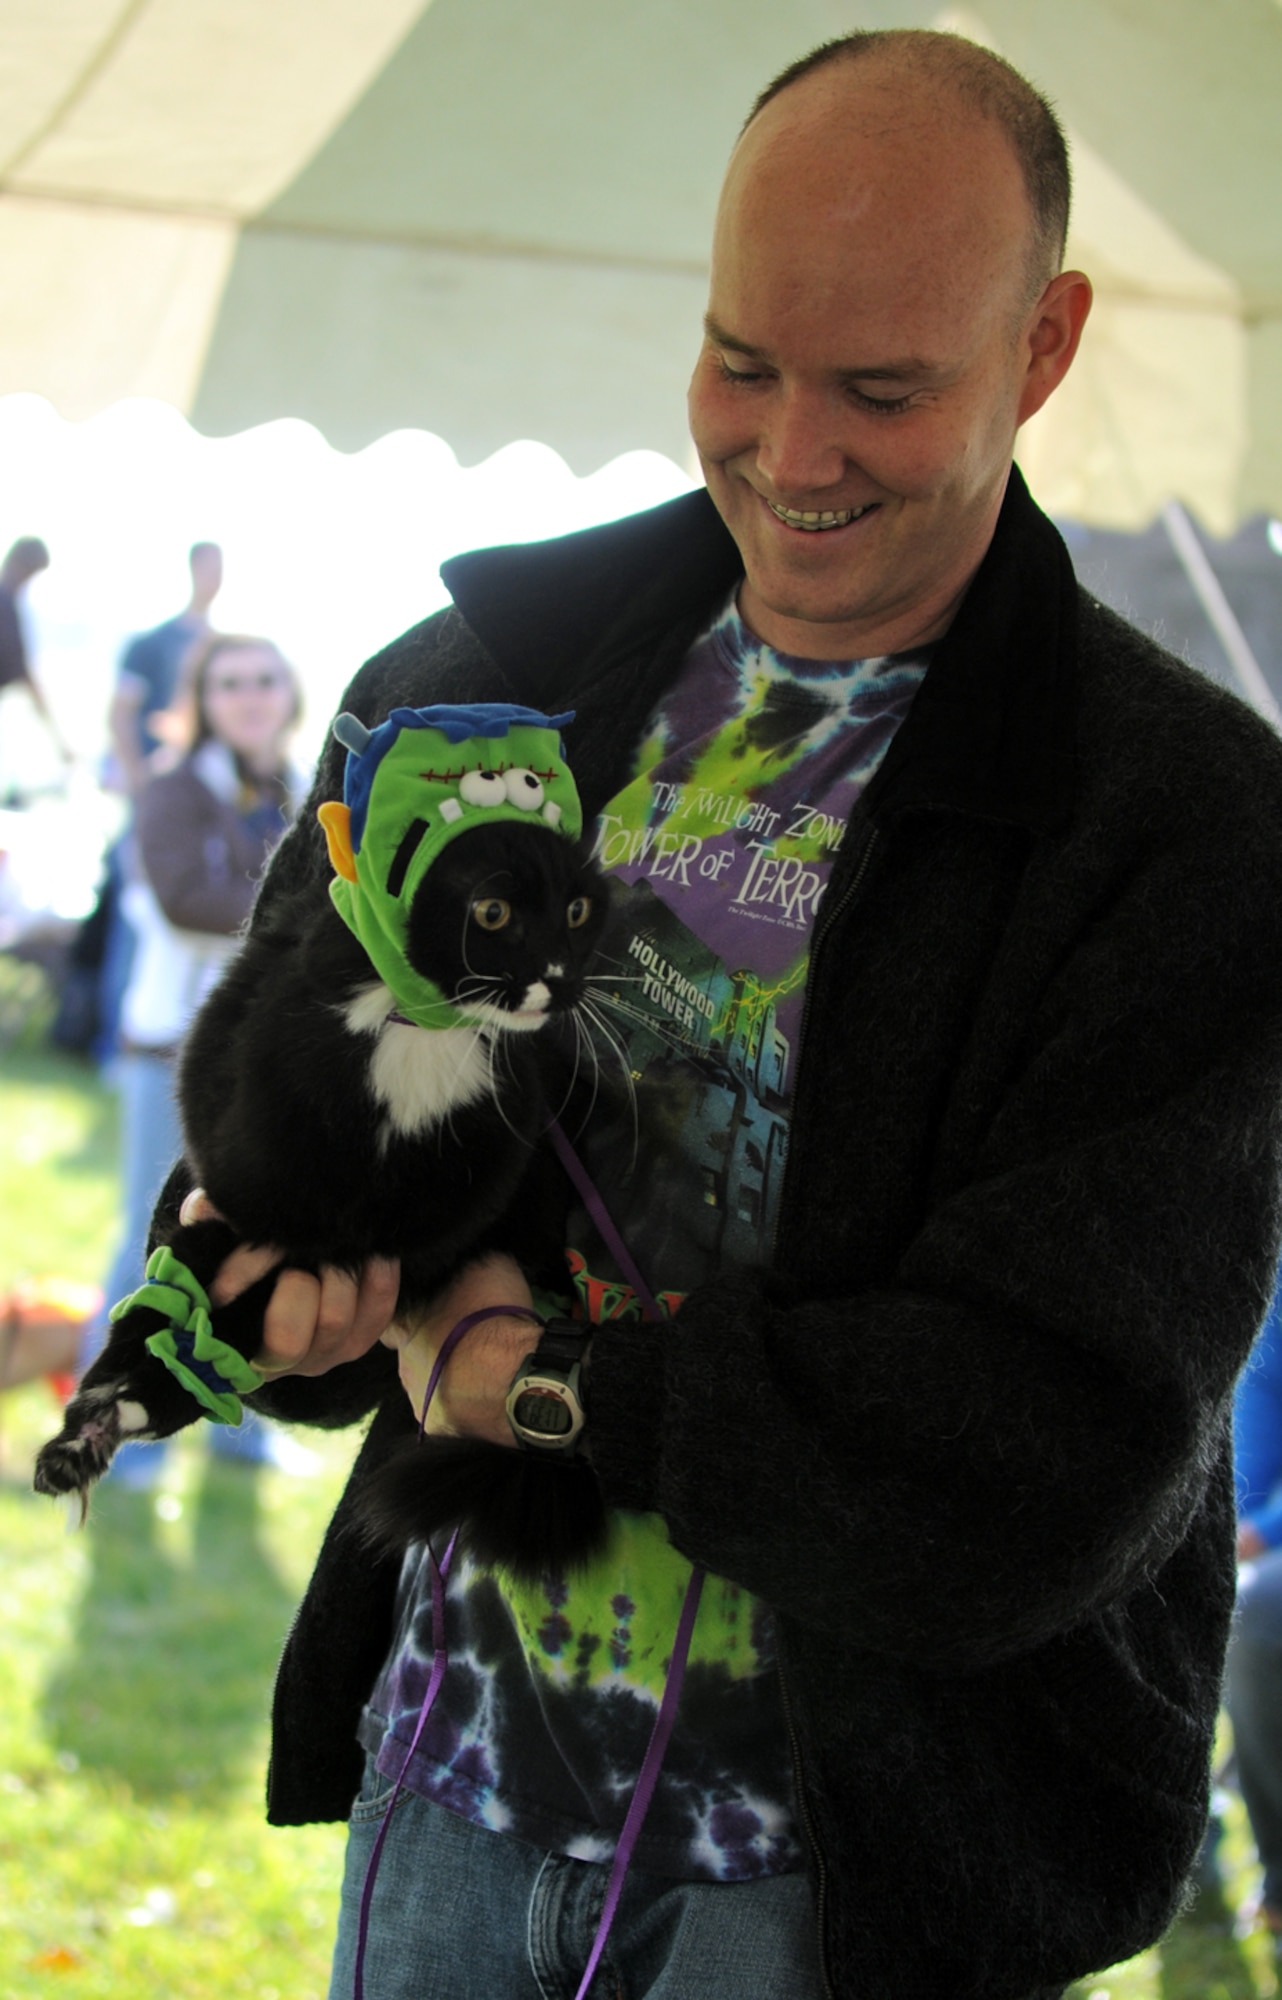 RAF FELTWELL, England -- Army Staff Sgt. Oliver Brunhoeber, RAF Feltwell Veterinary Clinic NCO in charge, shows "Frankencat," more commonly known as Scout, to judges at the clinic's 2nd Annual Petfest Oct. 12.  The event included several contests, including costume and pet/owner lookalike competitions, a military working dog demonstration and dog treat bake sale for charity.  (U.S. Air Force photo/Staff Sgt. Austin M. May)